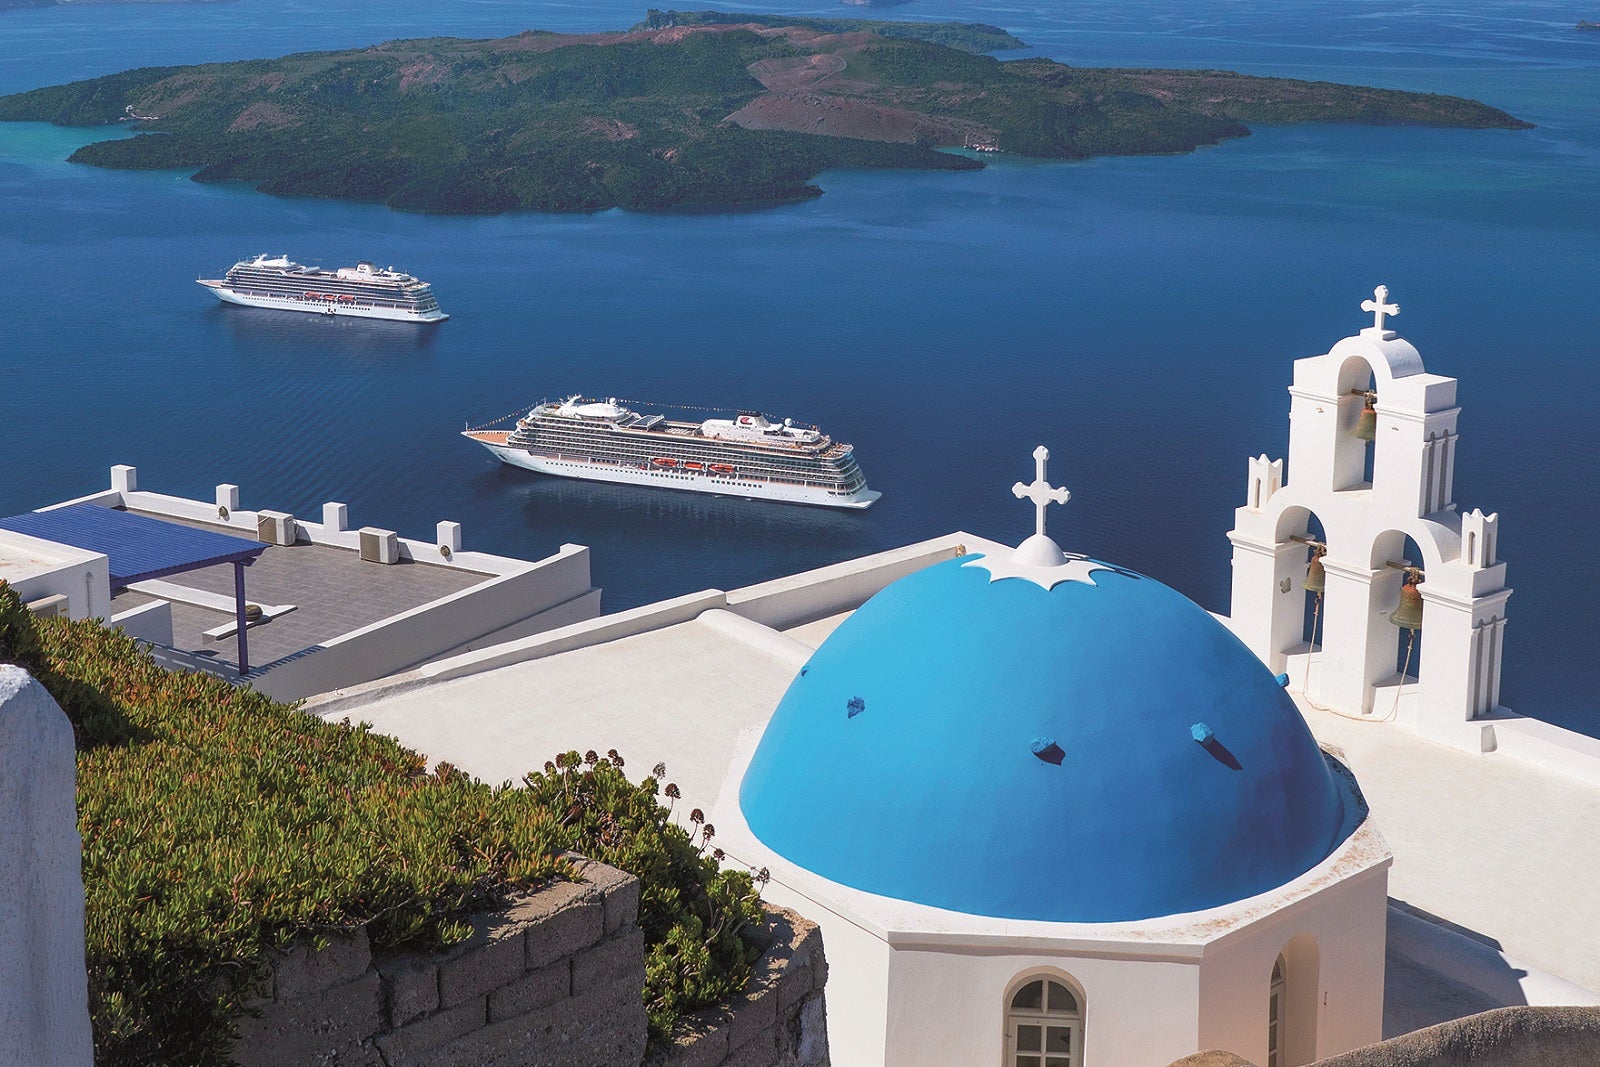 Best European cruises: 6 ships that stand out across the pond – The Points Guy